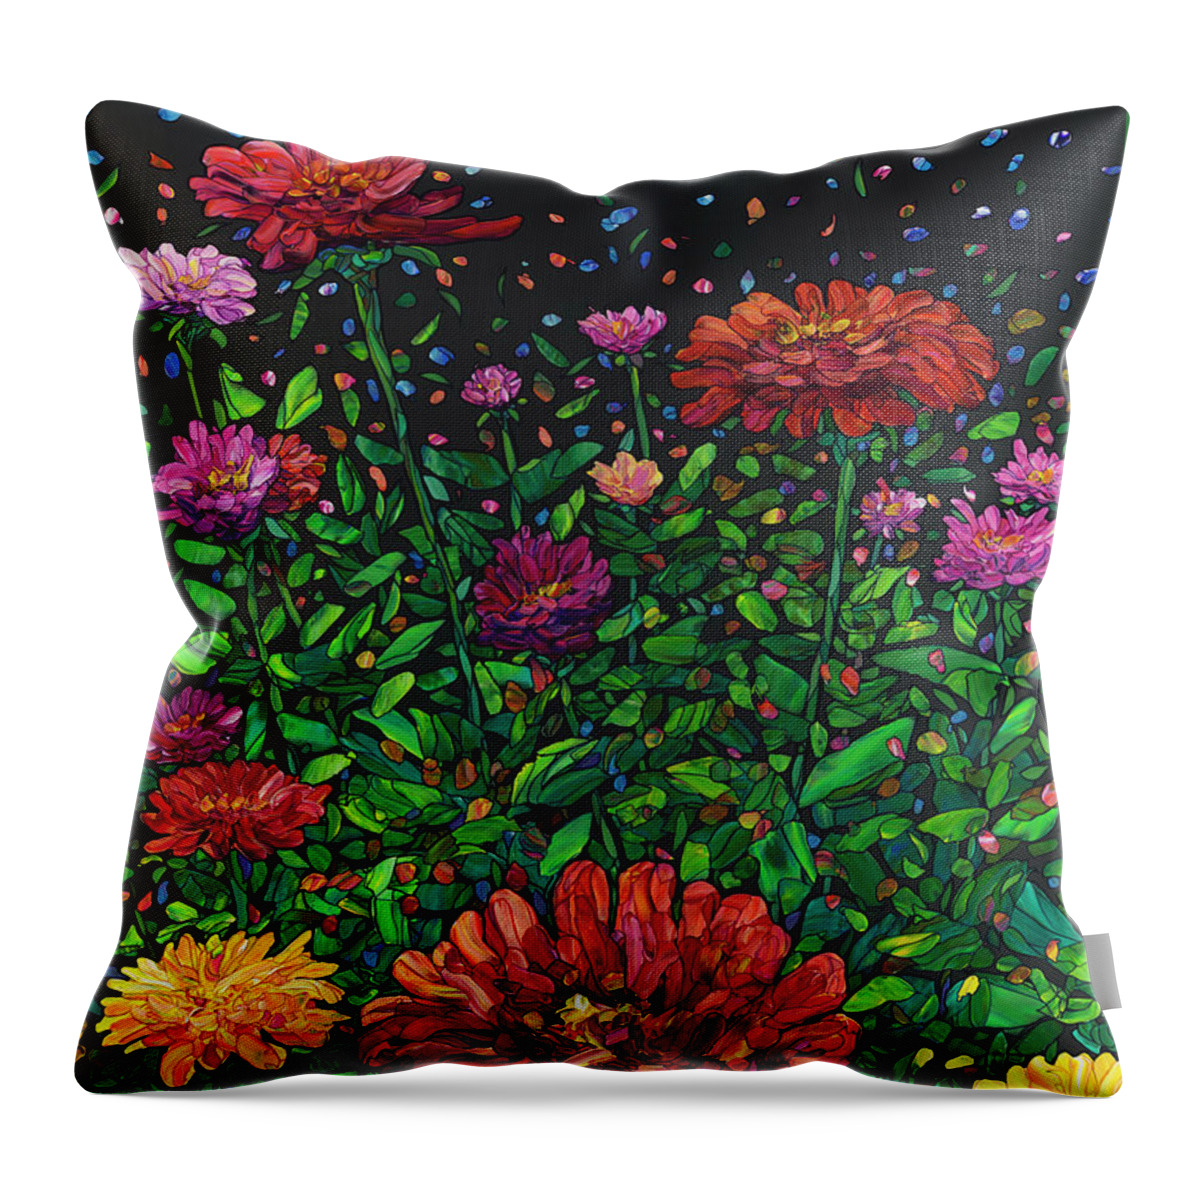 Flowers Throw Pillow featuring the painting Floral Interpretation - Zinnias by James W Johnson